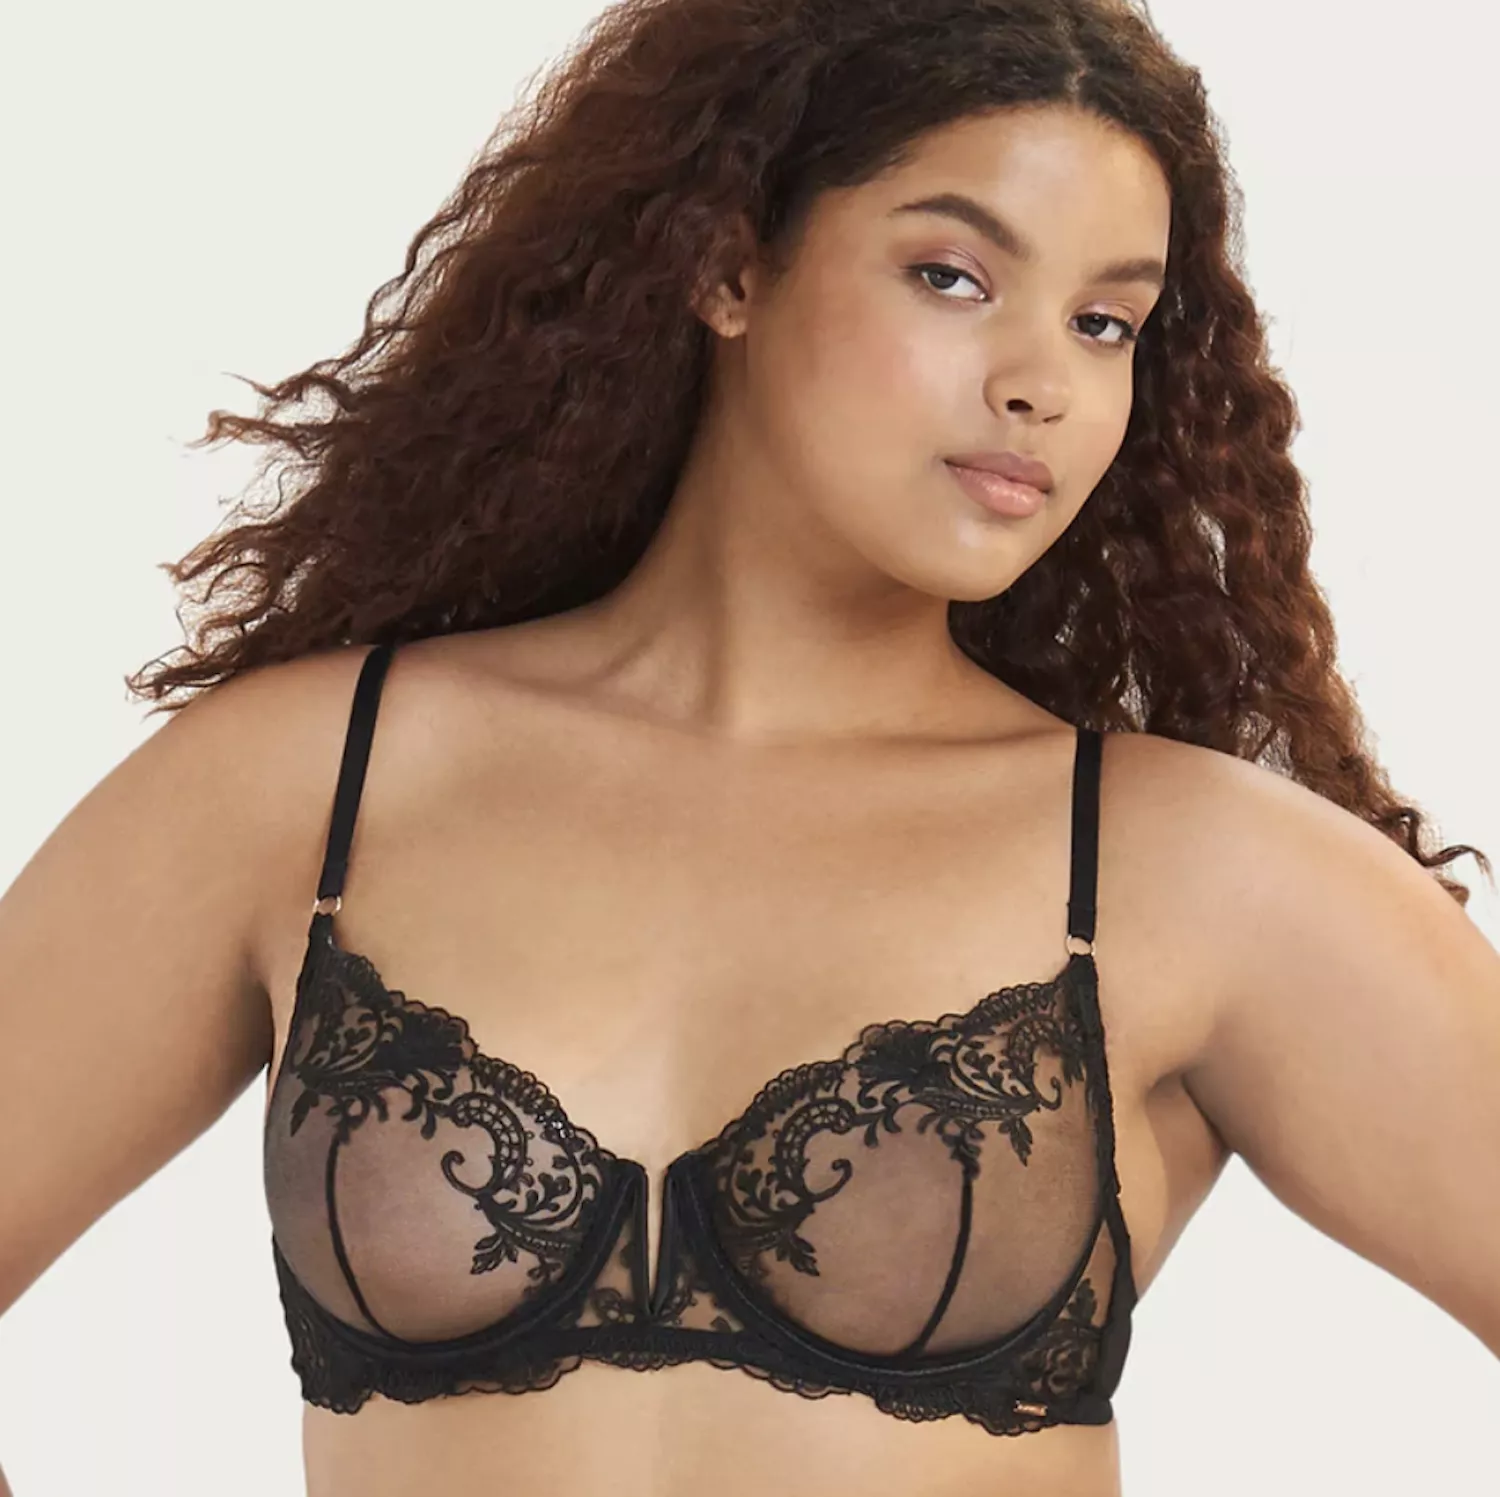 Model with curly hair wearing black sheer lace bra